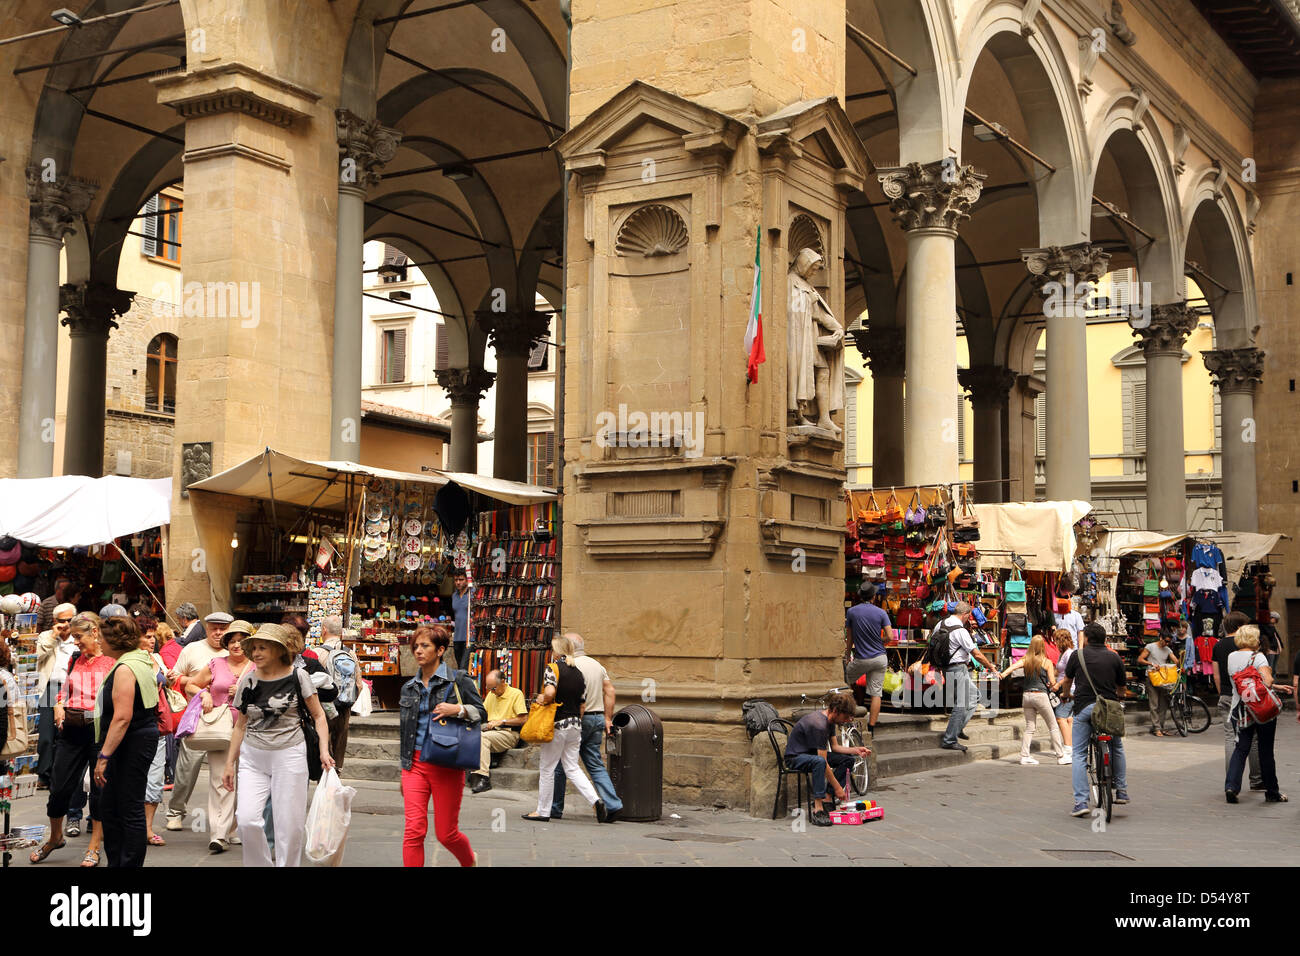 The Loggia del Mercato Nuovo has a market selling leather goods and souvenirs and is a popular tourist destination in Florence. Stock Photo